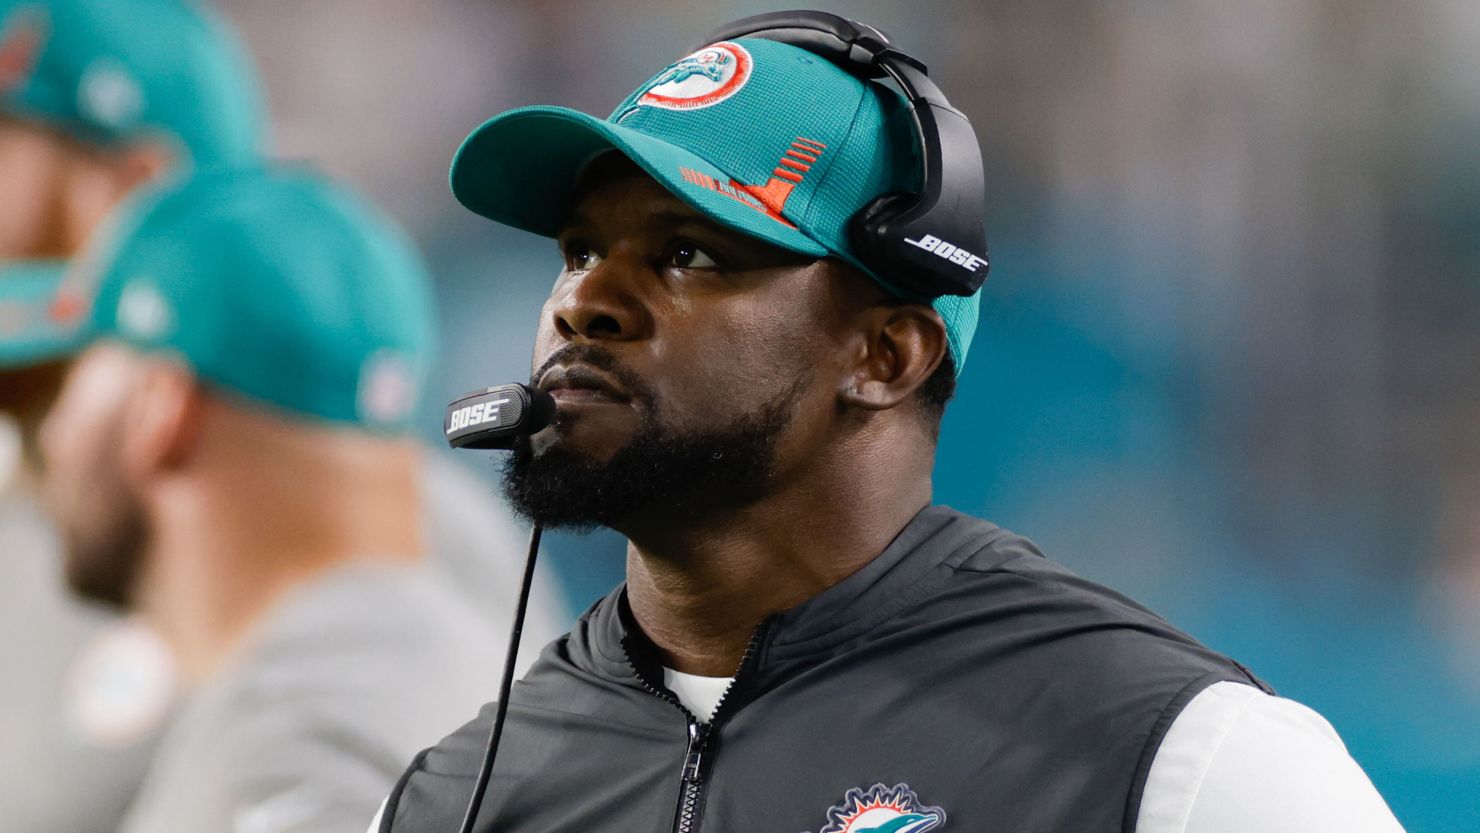 Brian Flores, then the head coach of the Miami Dolphins, is seen during the game between the Dolphins and New England Patriots on January 9.